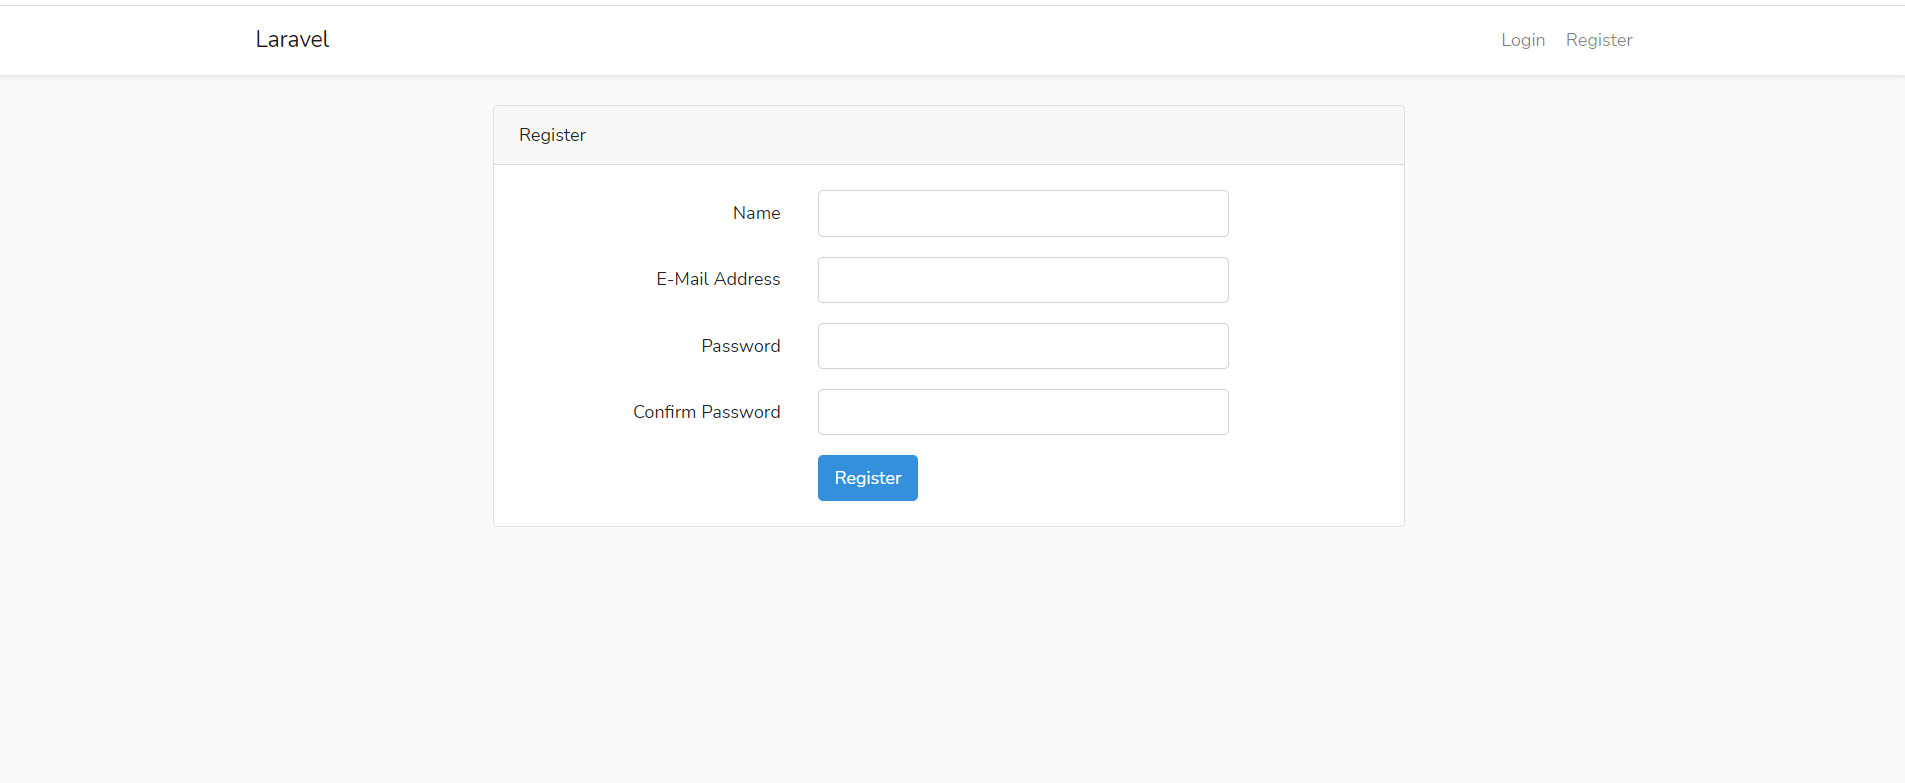 Auth user password. Login register. Ангуляр-ларавел. Register Page. Auth close.